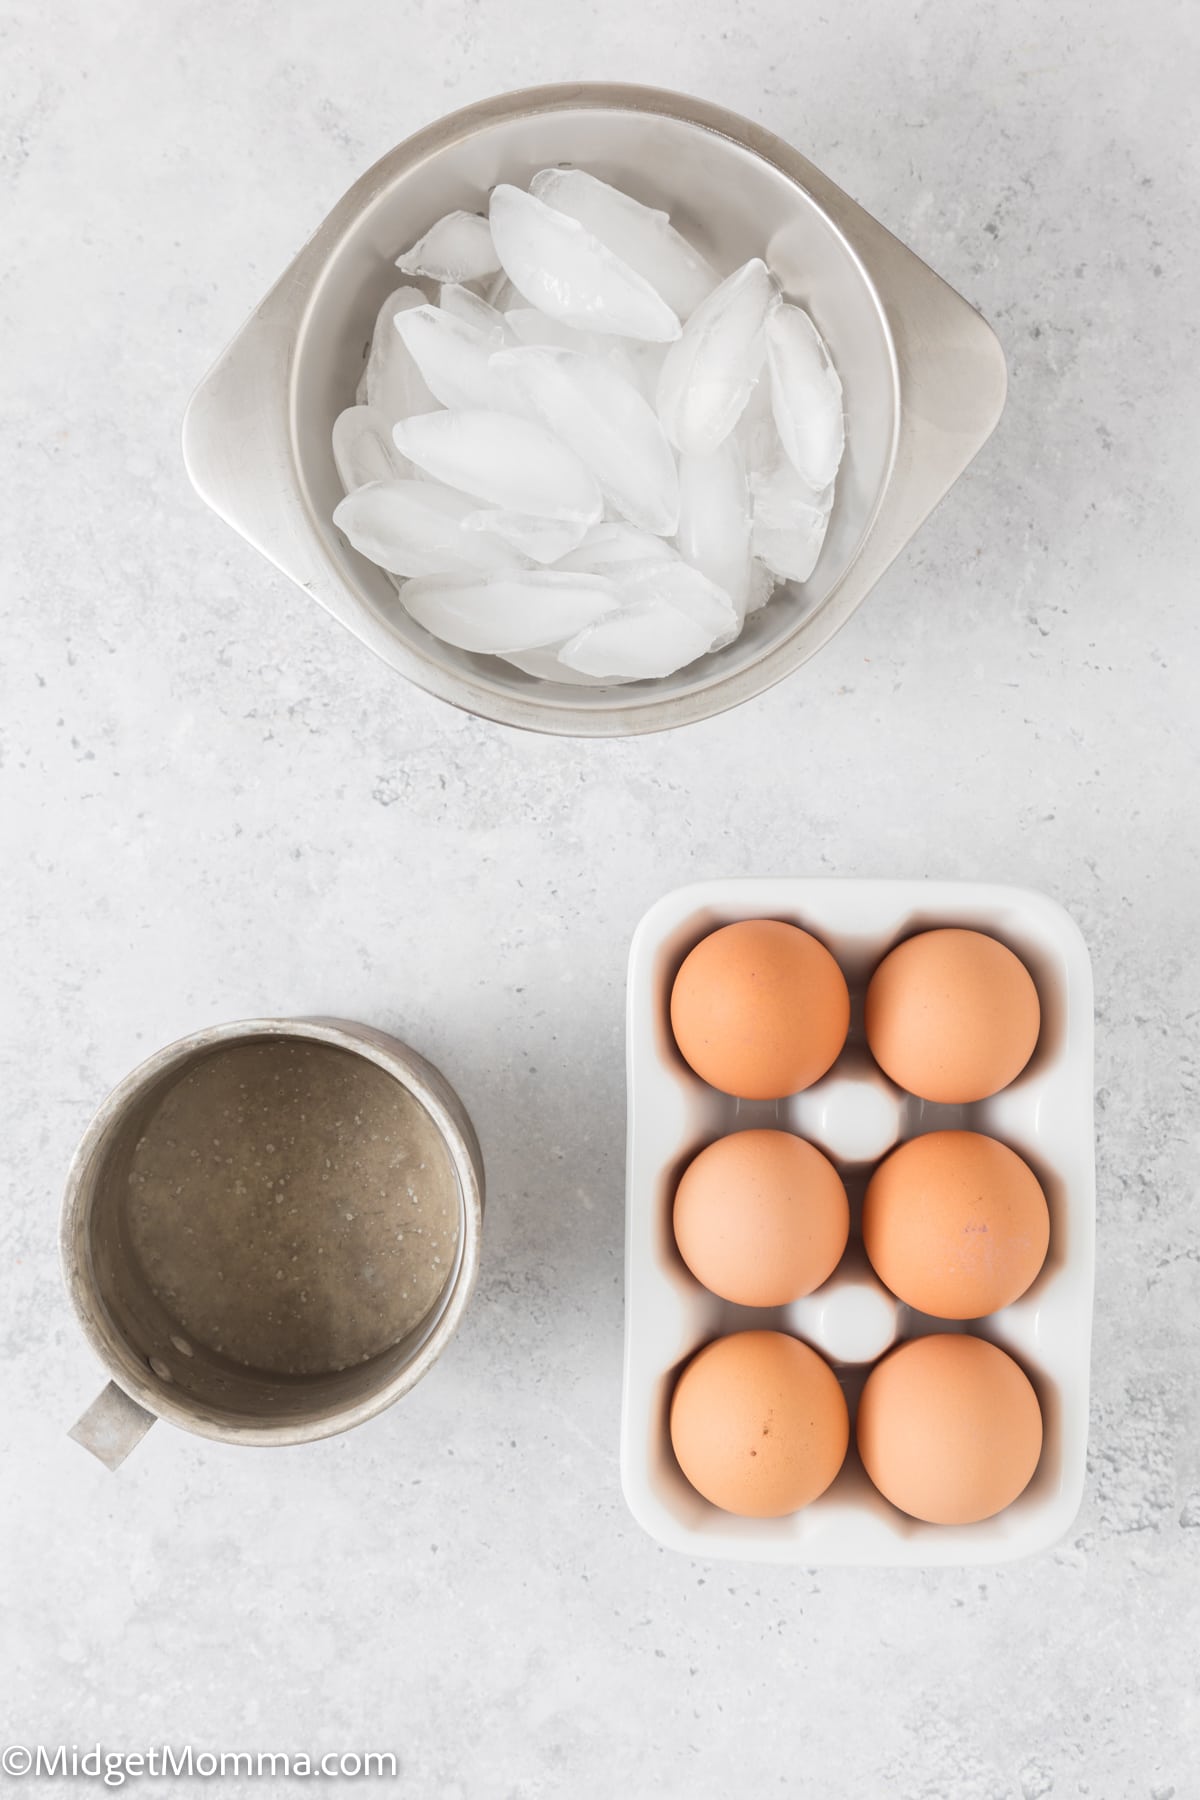 Eggs and ice in a bowl on a white surface.